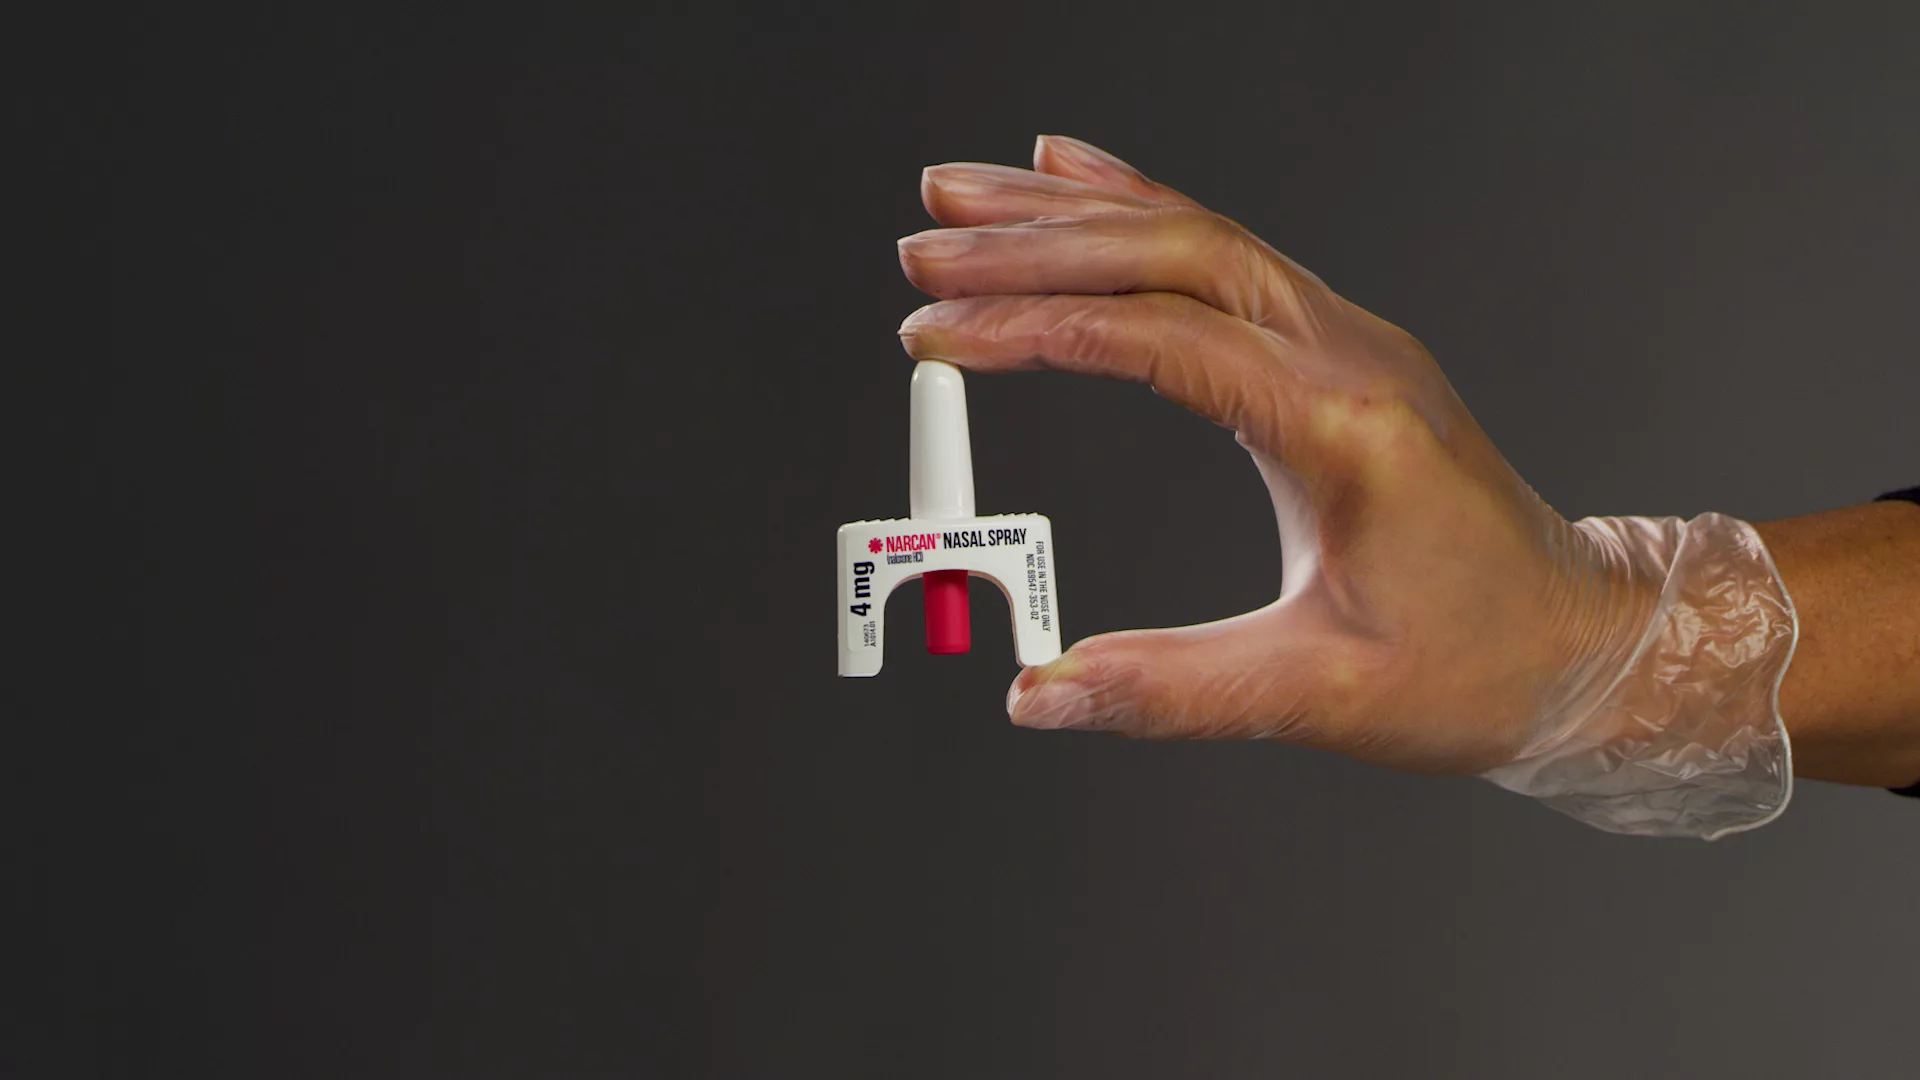 Emily’s Hope Applauds FDA Decision to Approve Over-the-Counter Naloxone Nasal Spray